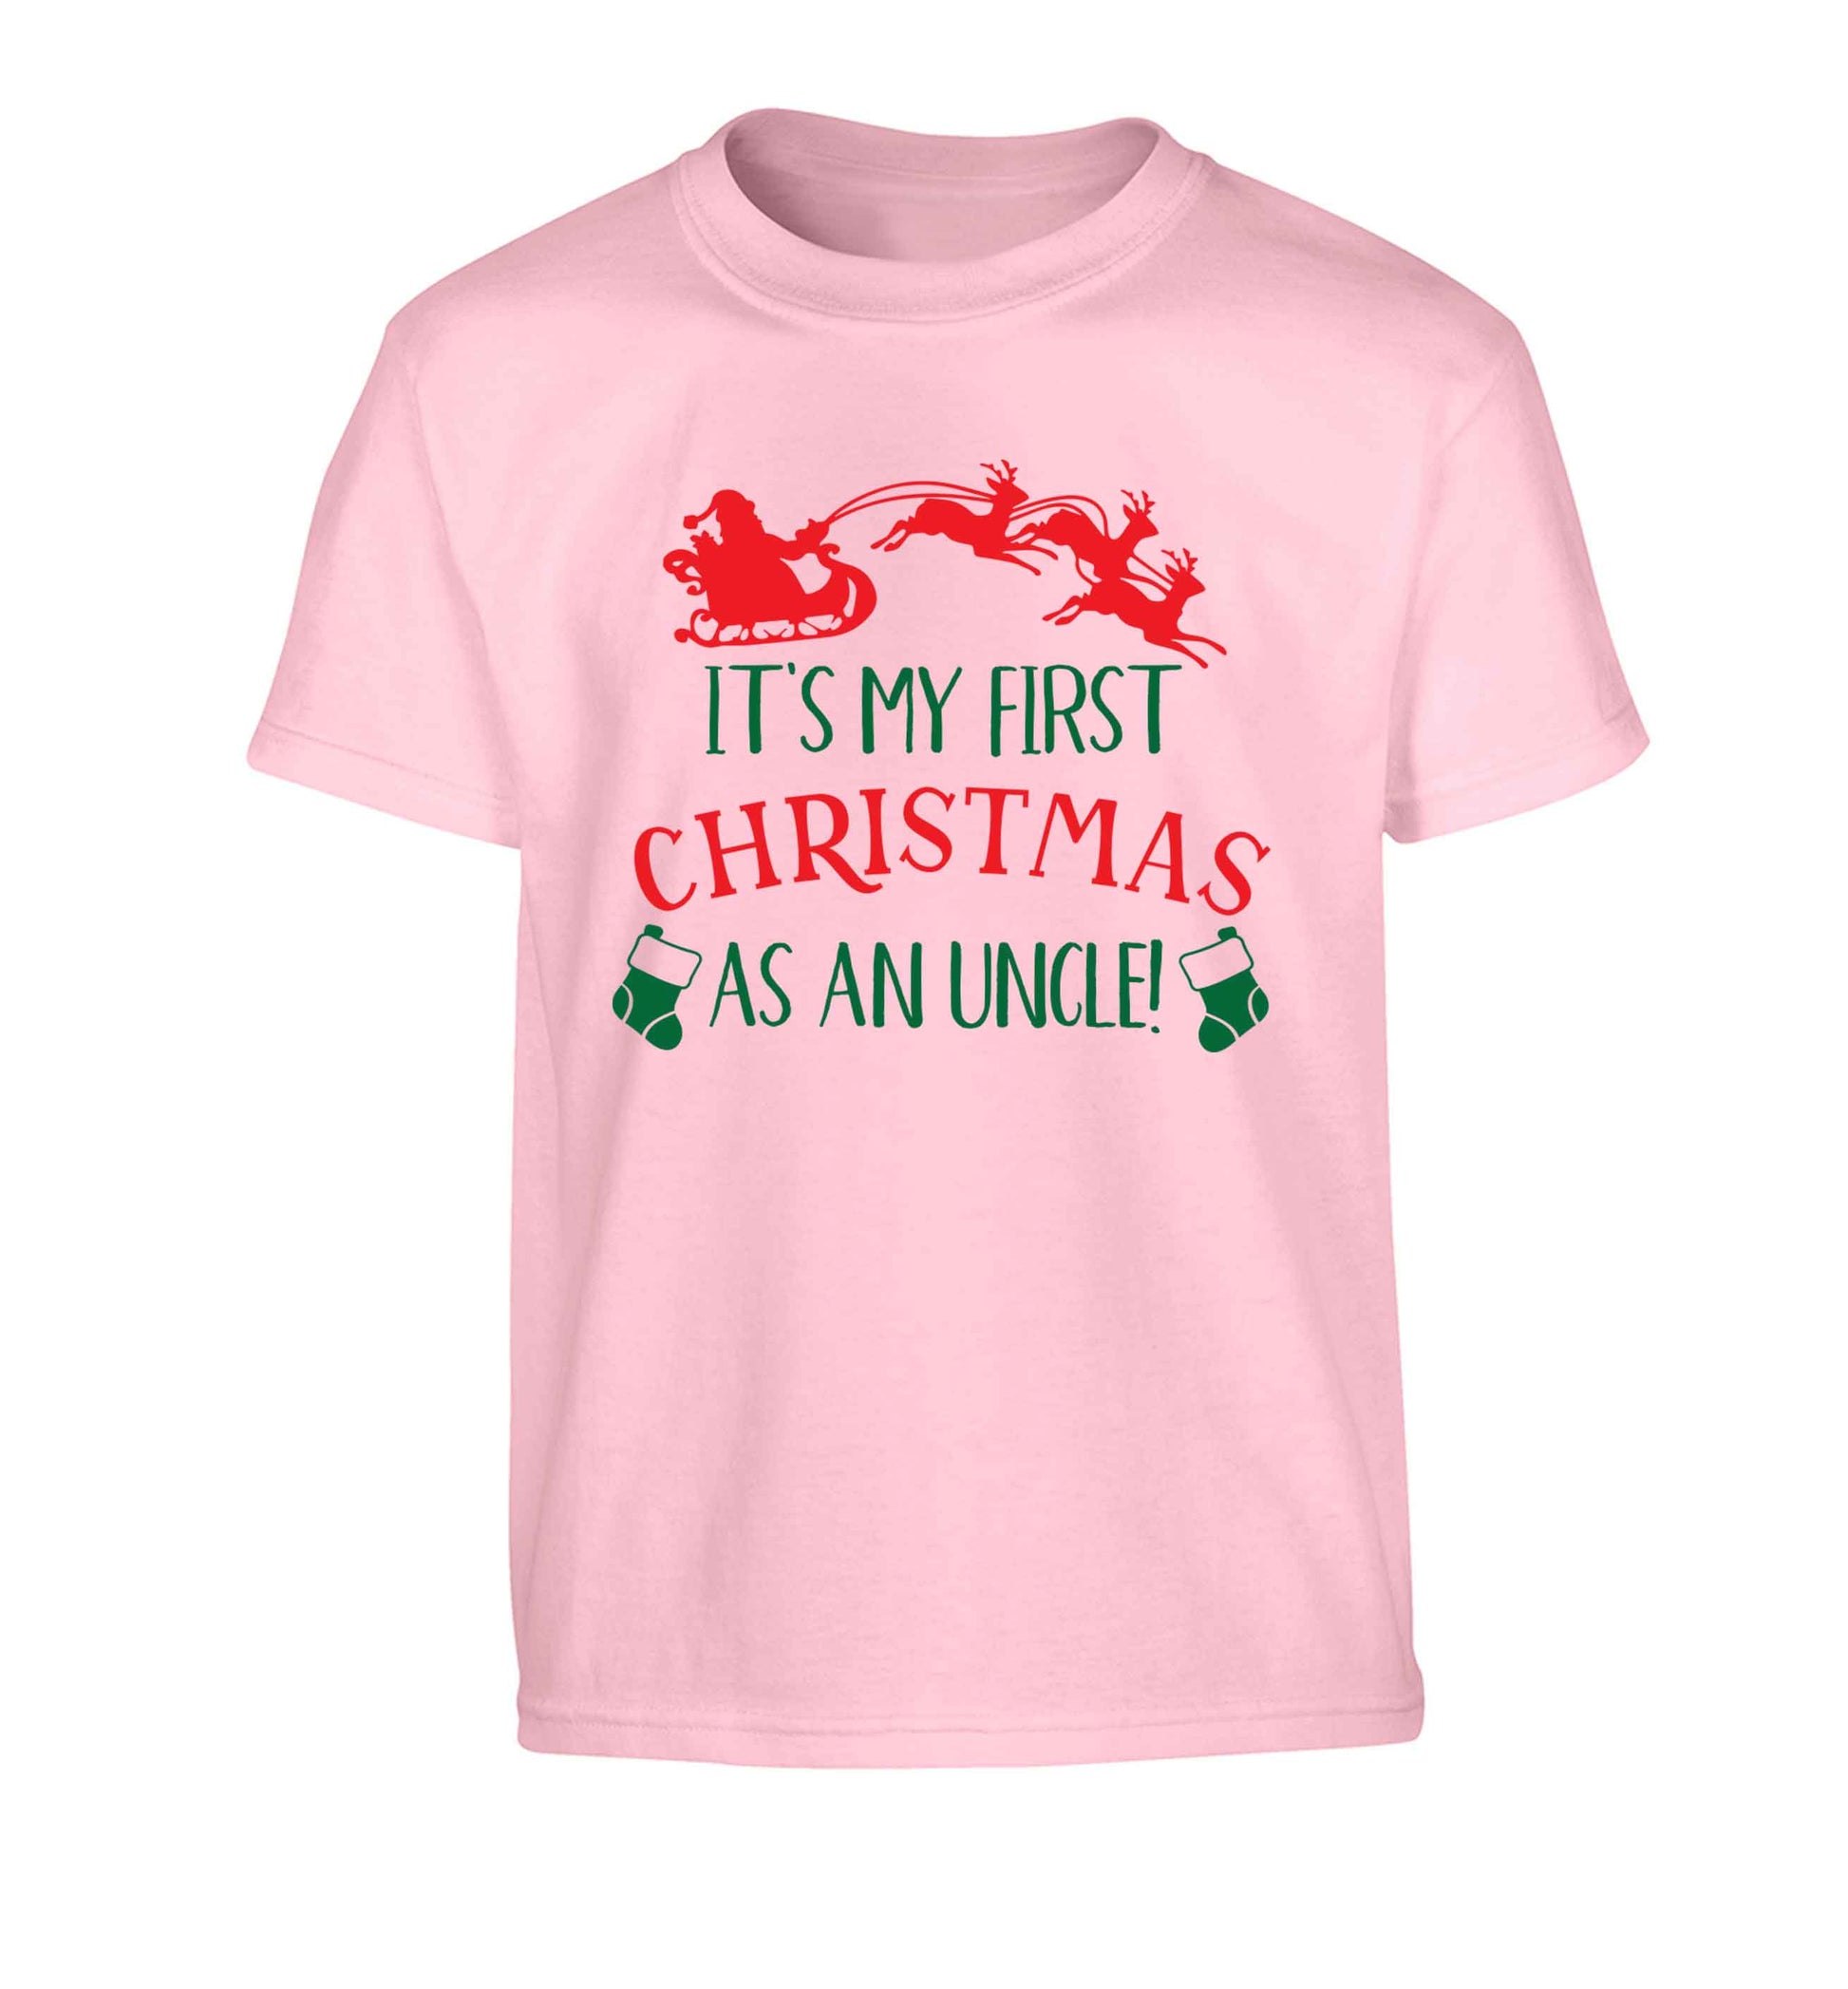 It's my first Christmas as an uncle! Children's light pink Tshirt 12-13 Years